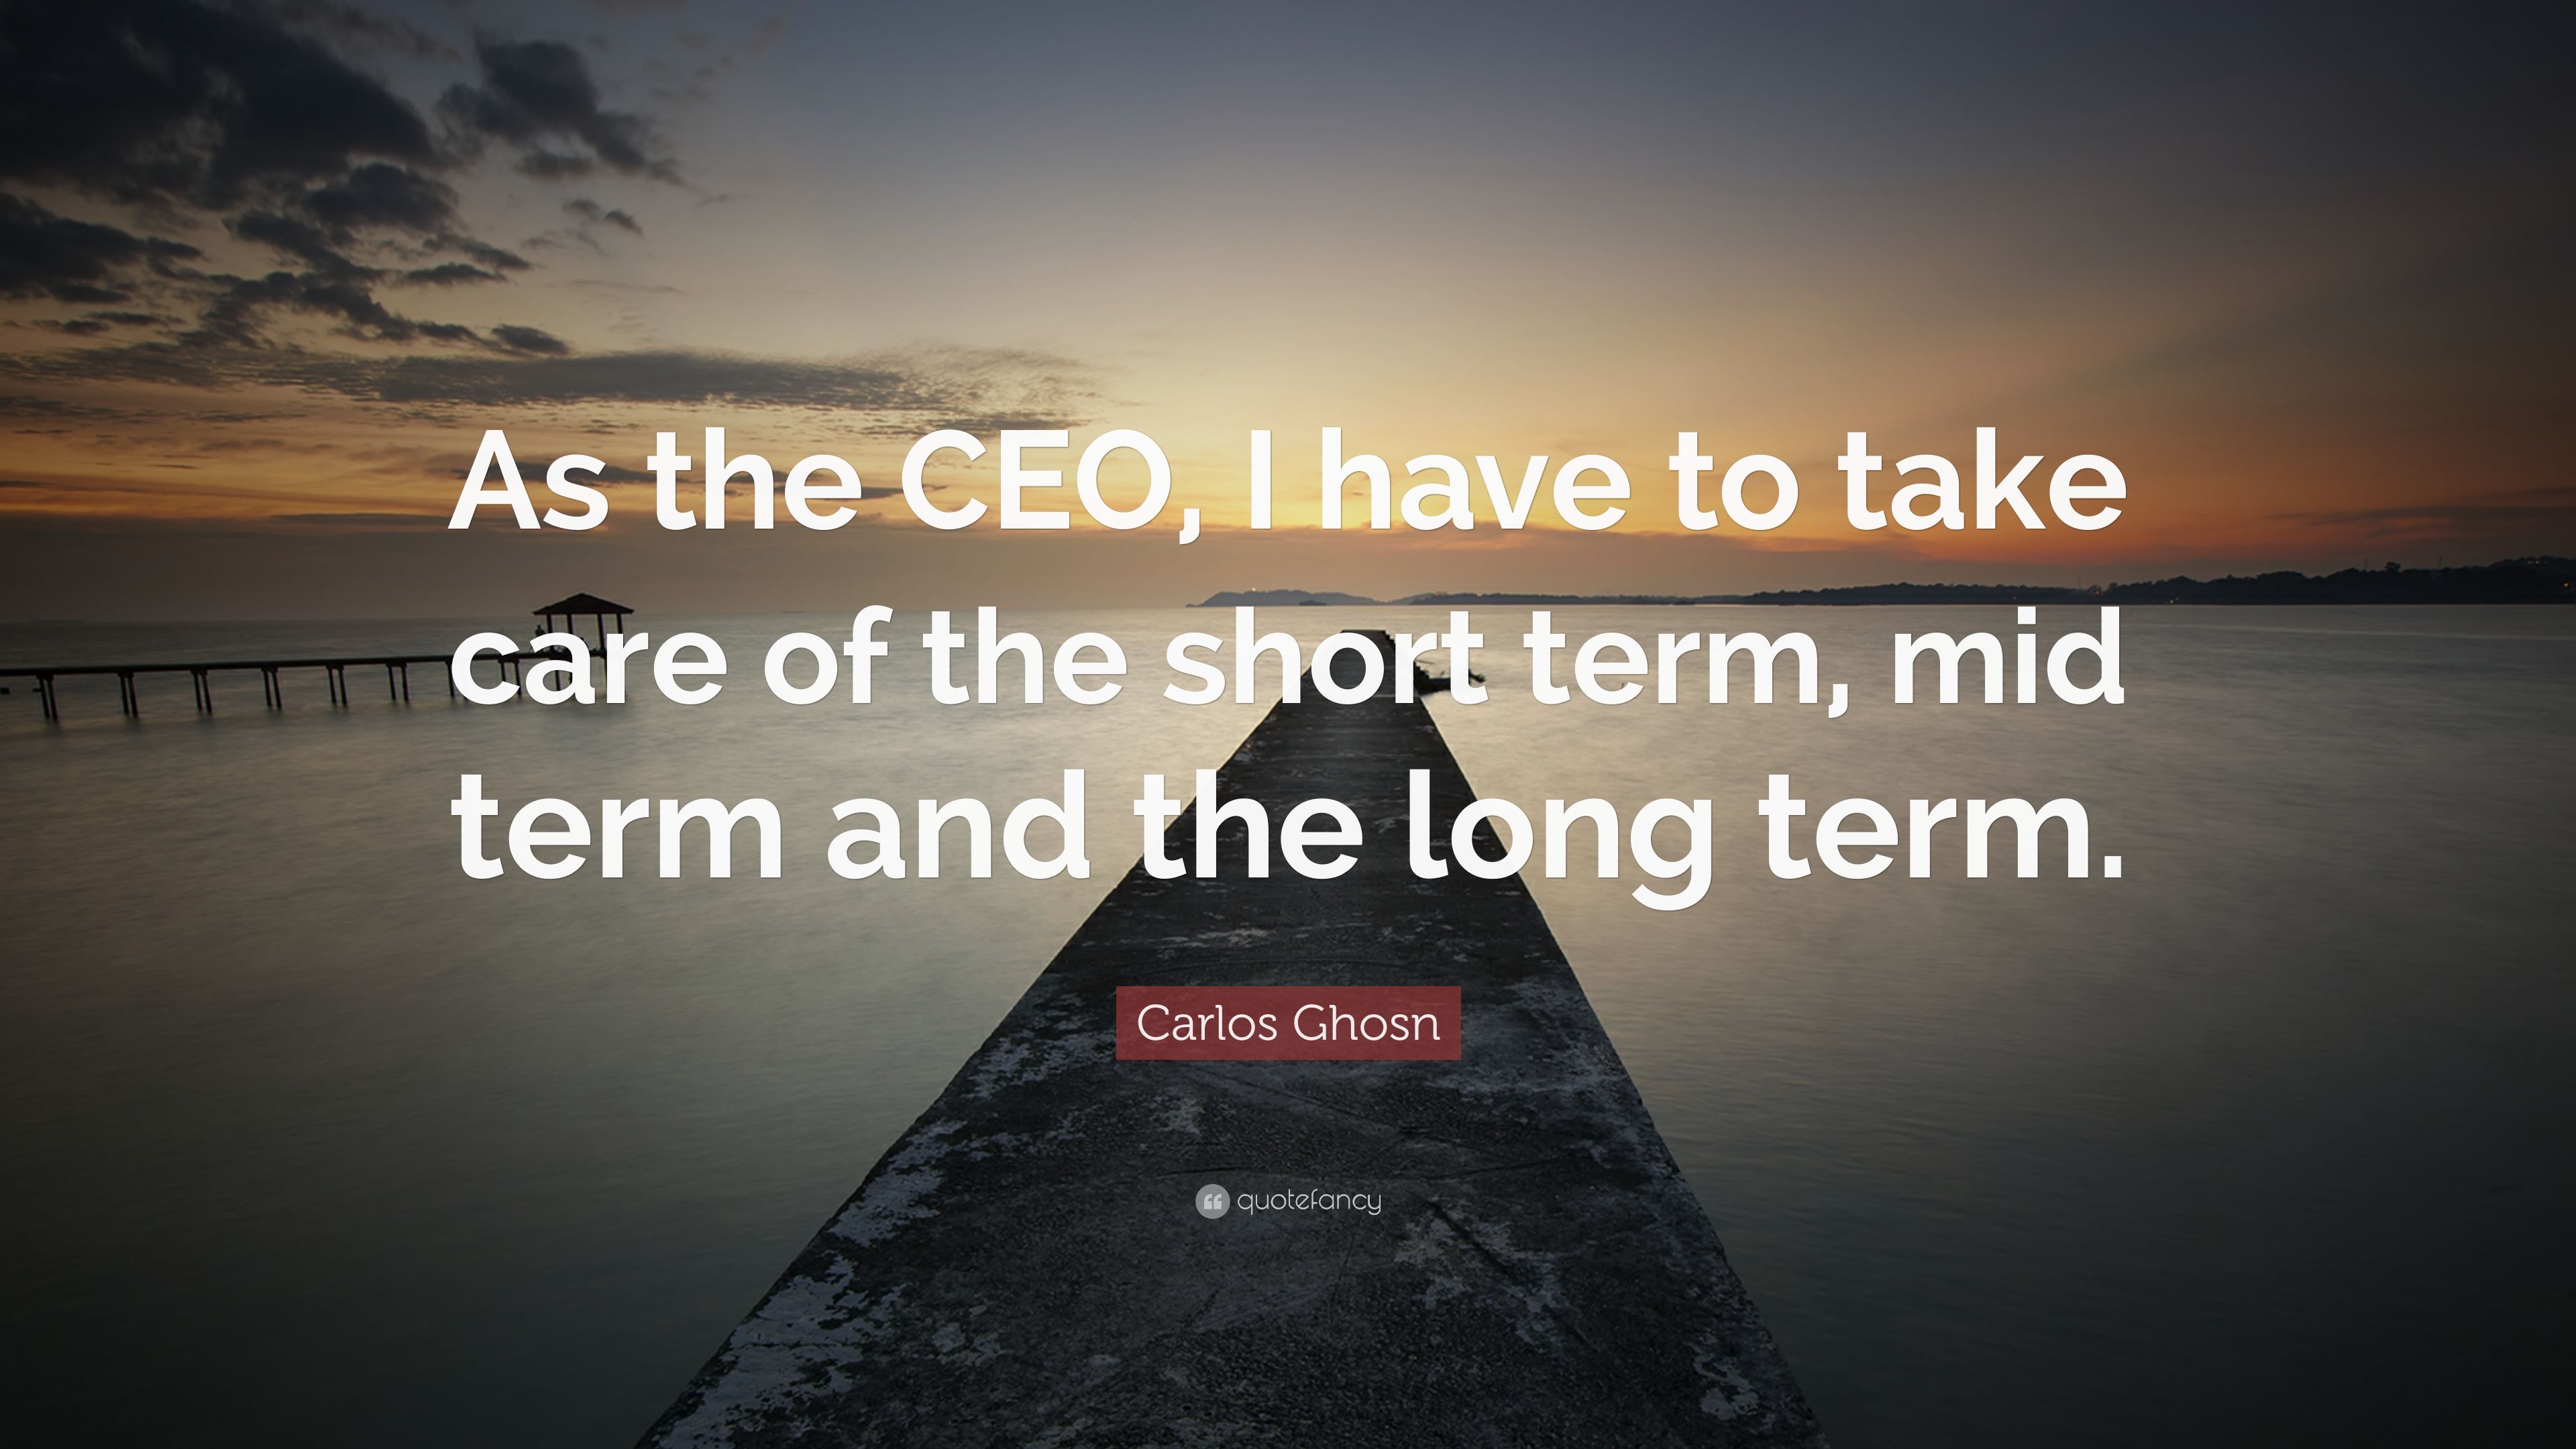 Carlos Ghosn Quote: “As the CEO, I have to take care of the short term, mid term and the long term.” (7 wallpaper)